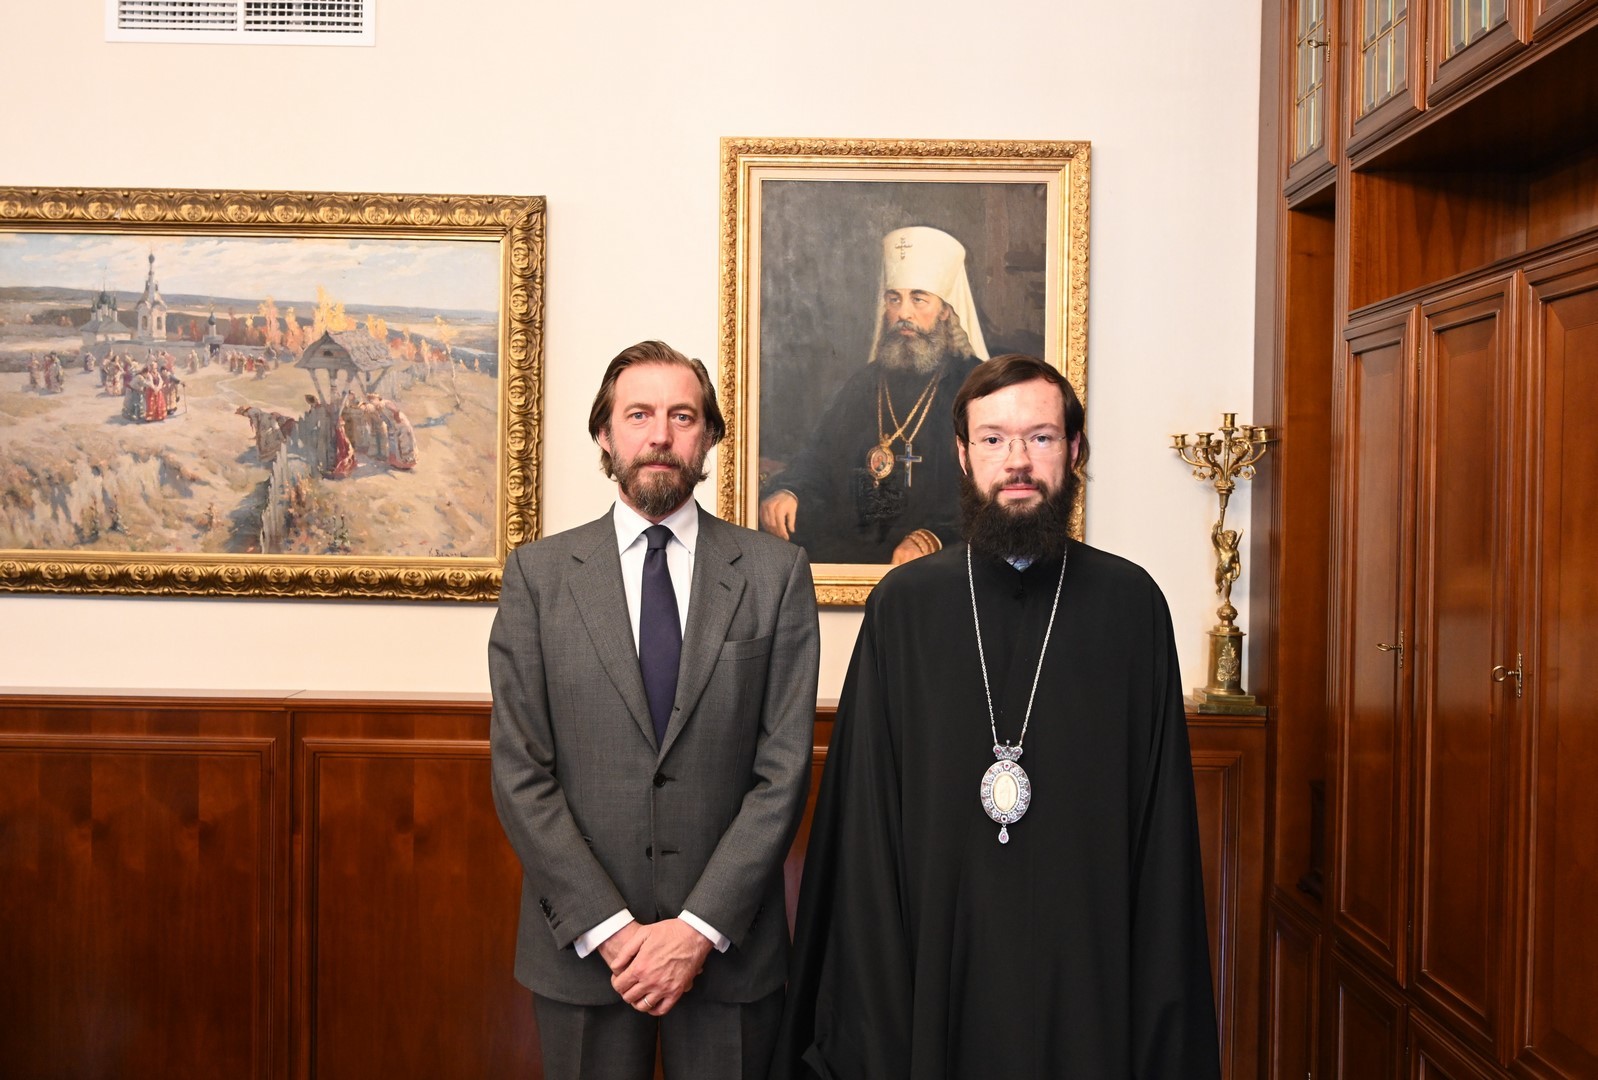 Meeting with Metropolitan Anthony of Volokolamsk, Chairman of the Department for External Church Relations of the Moscow Patriarchate